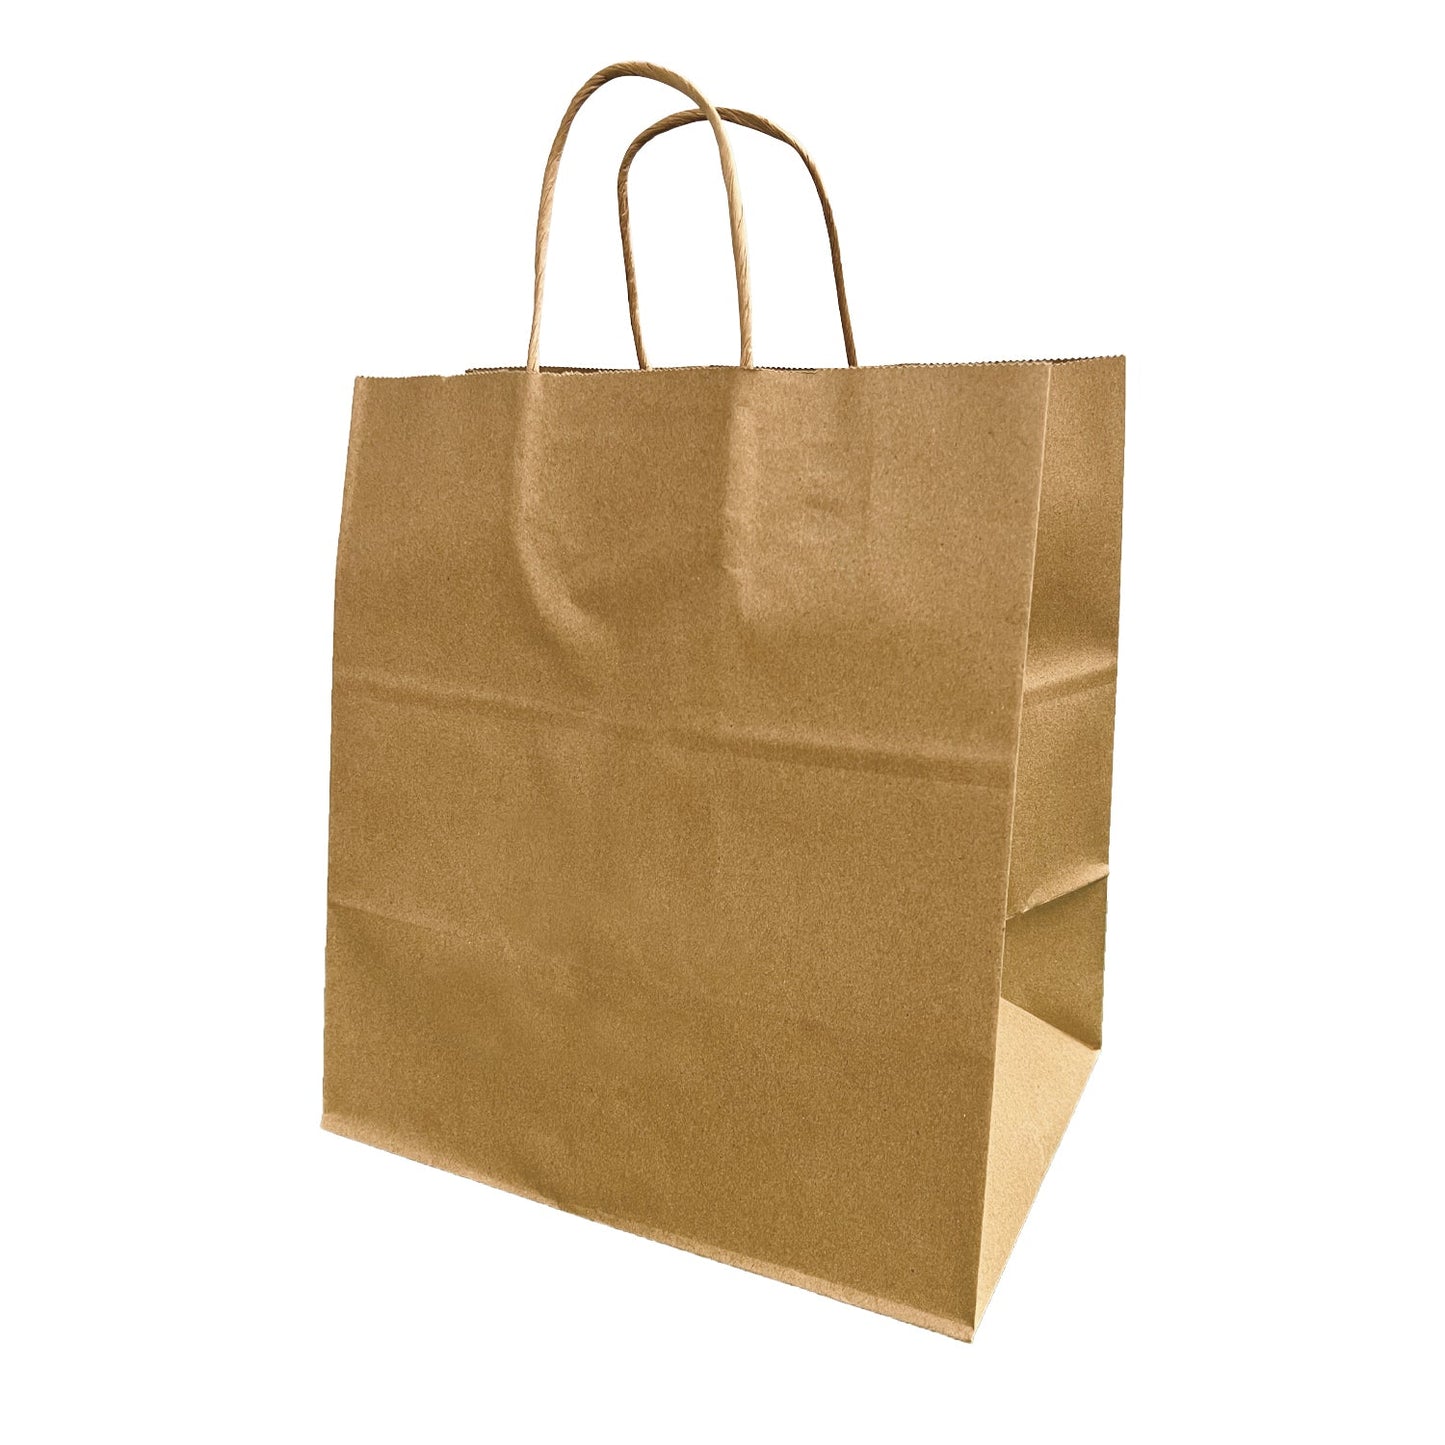 1182B | 200pcs Bento 11x8x12 inches Kraft Paper Bag Cardboard Insert with Twisted Handles, $0.51/pc